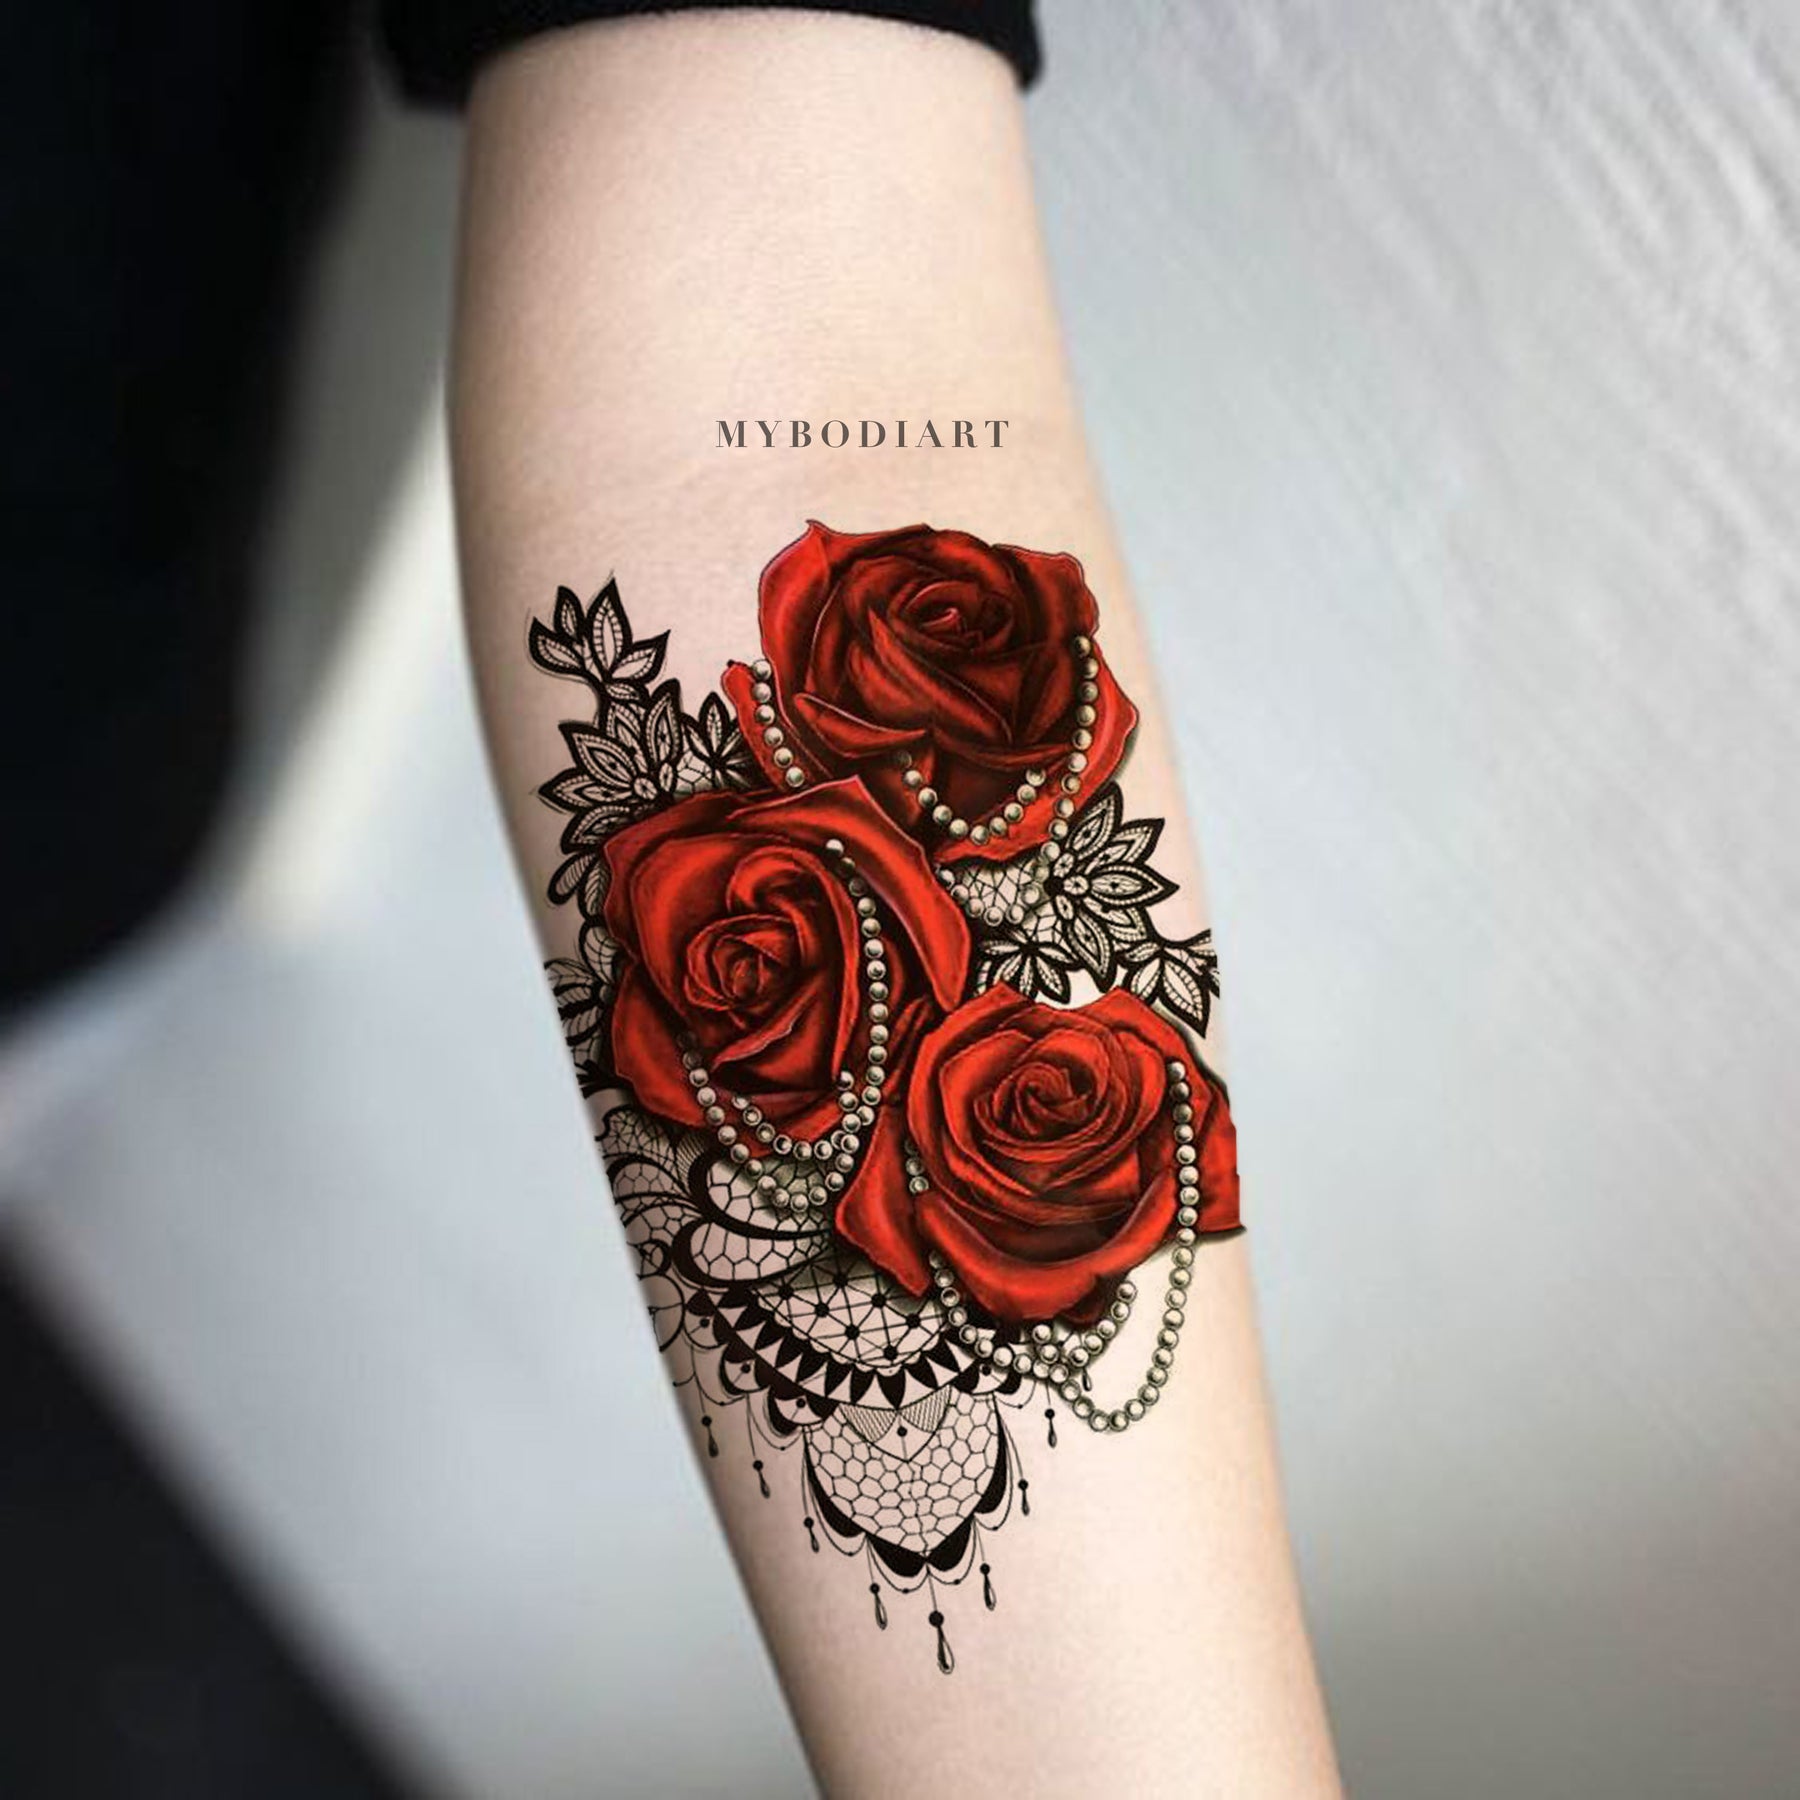  90 Best Black Rose Tattoo Designs  Meaning and Ideas for Girls Women  and Men